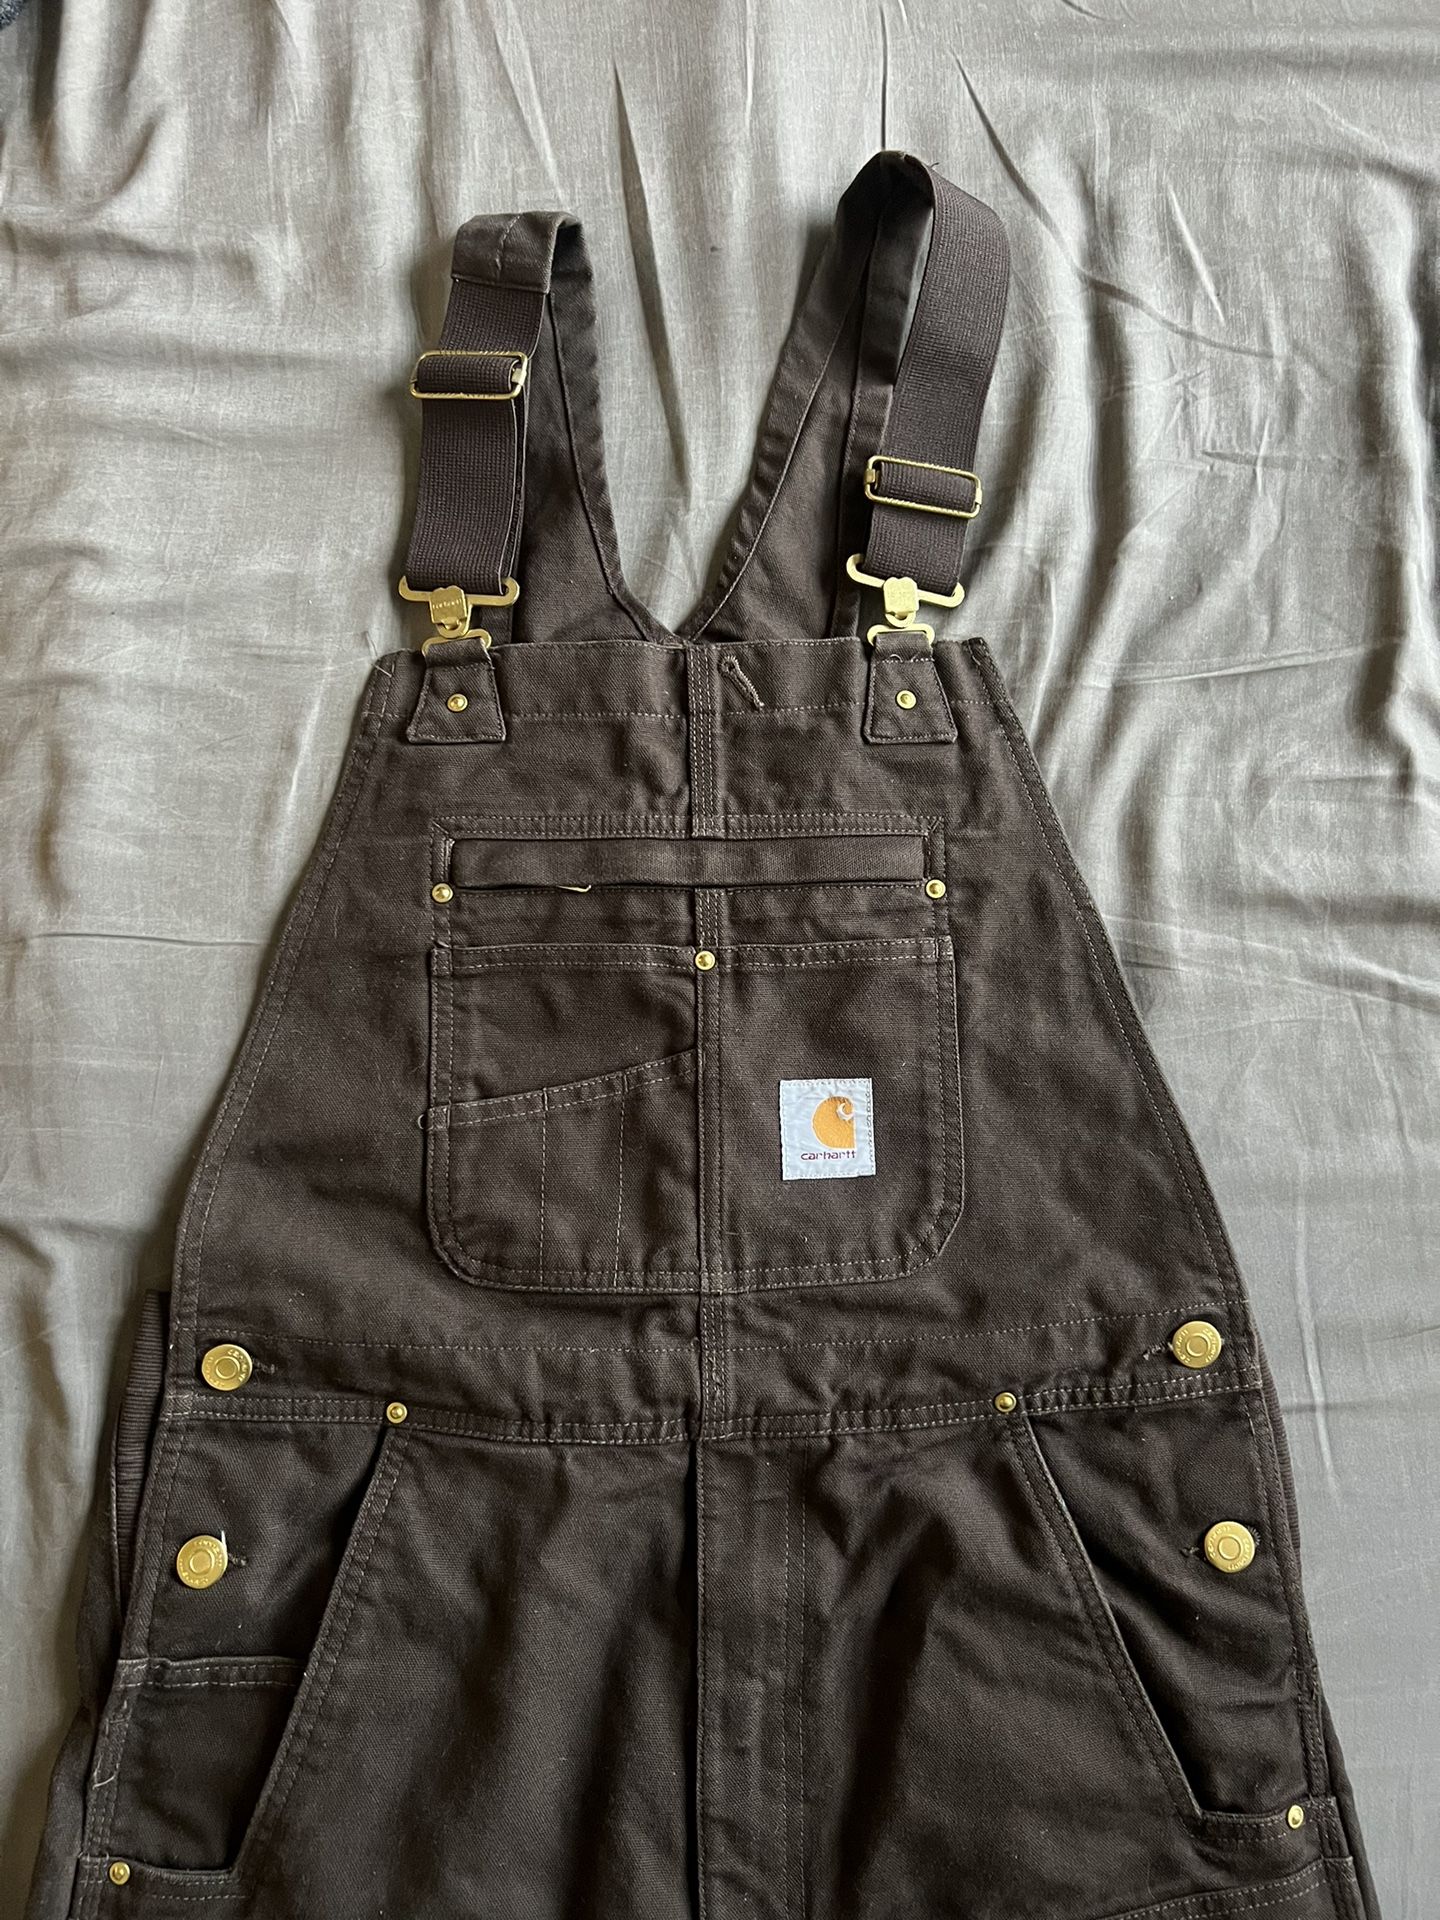 Carhartt Double Knee Overall (Brown) for Sale in Chula Vista, CA - OfferUp